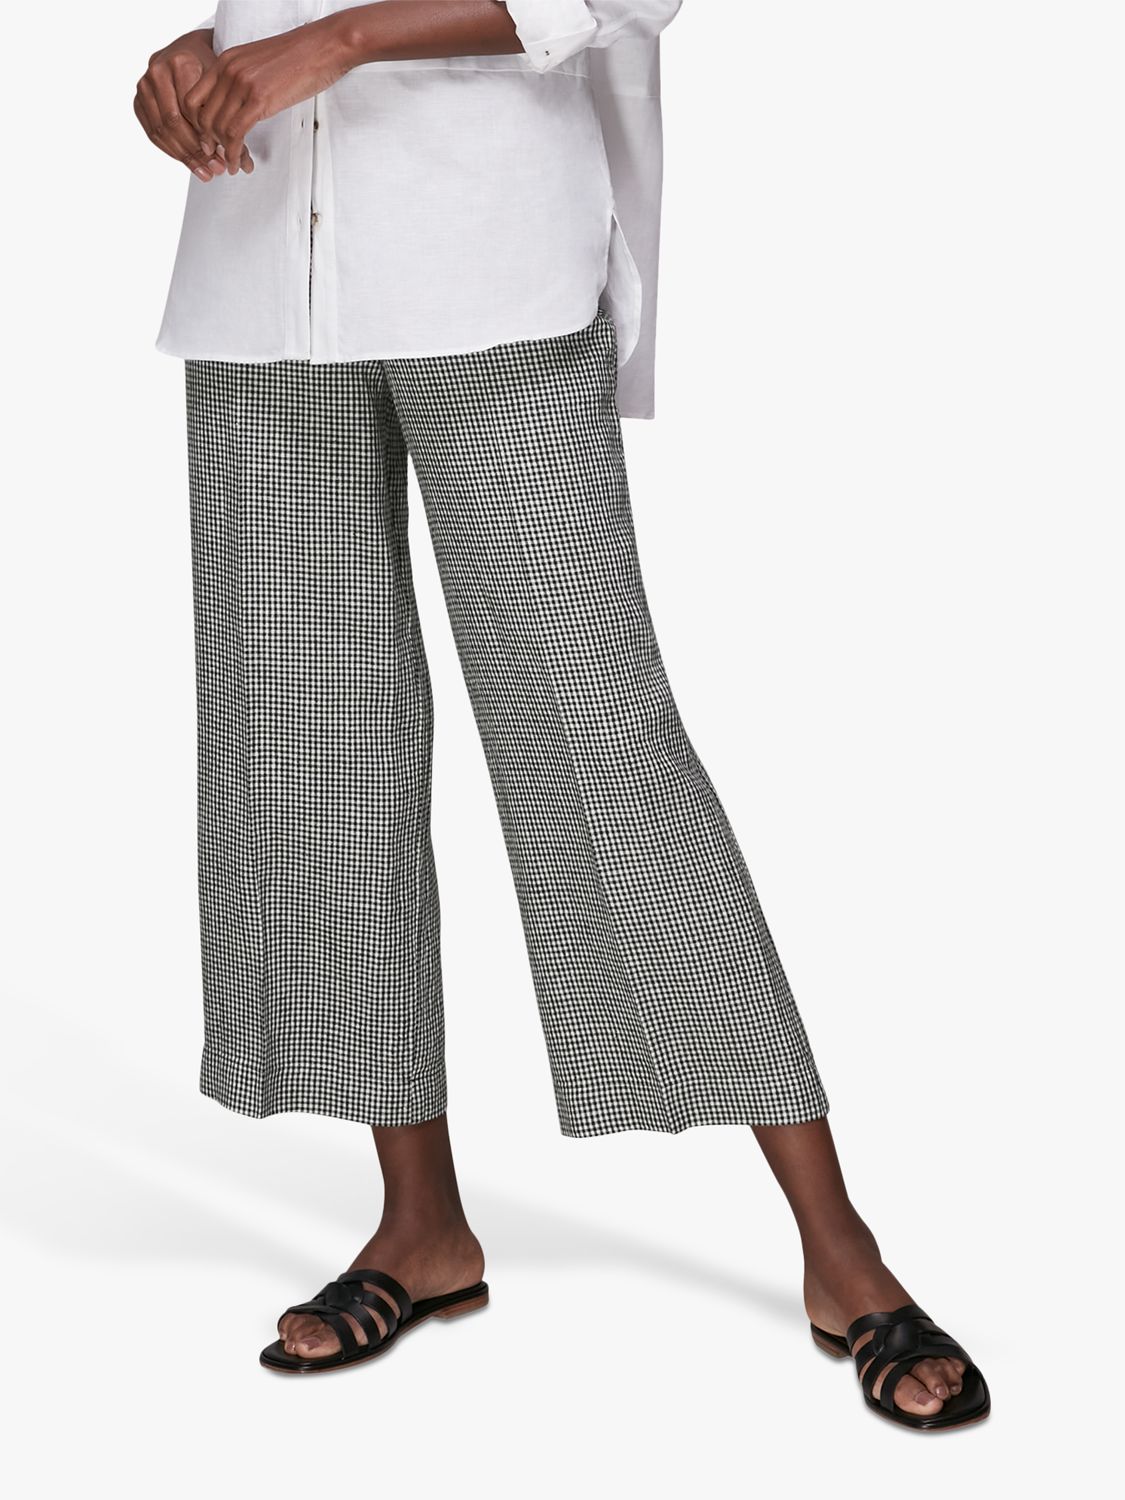 Womens Trousers Whistles Check Linen Cropped Trousers in Blue Slacks and Chinos Grey Slacks and Chinos Whistles Trousers 